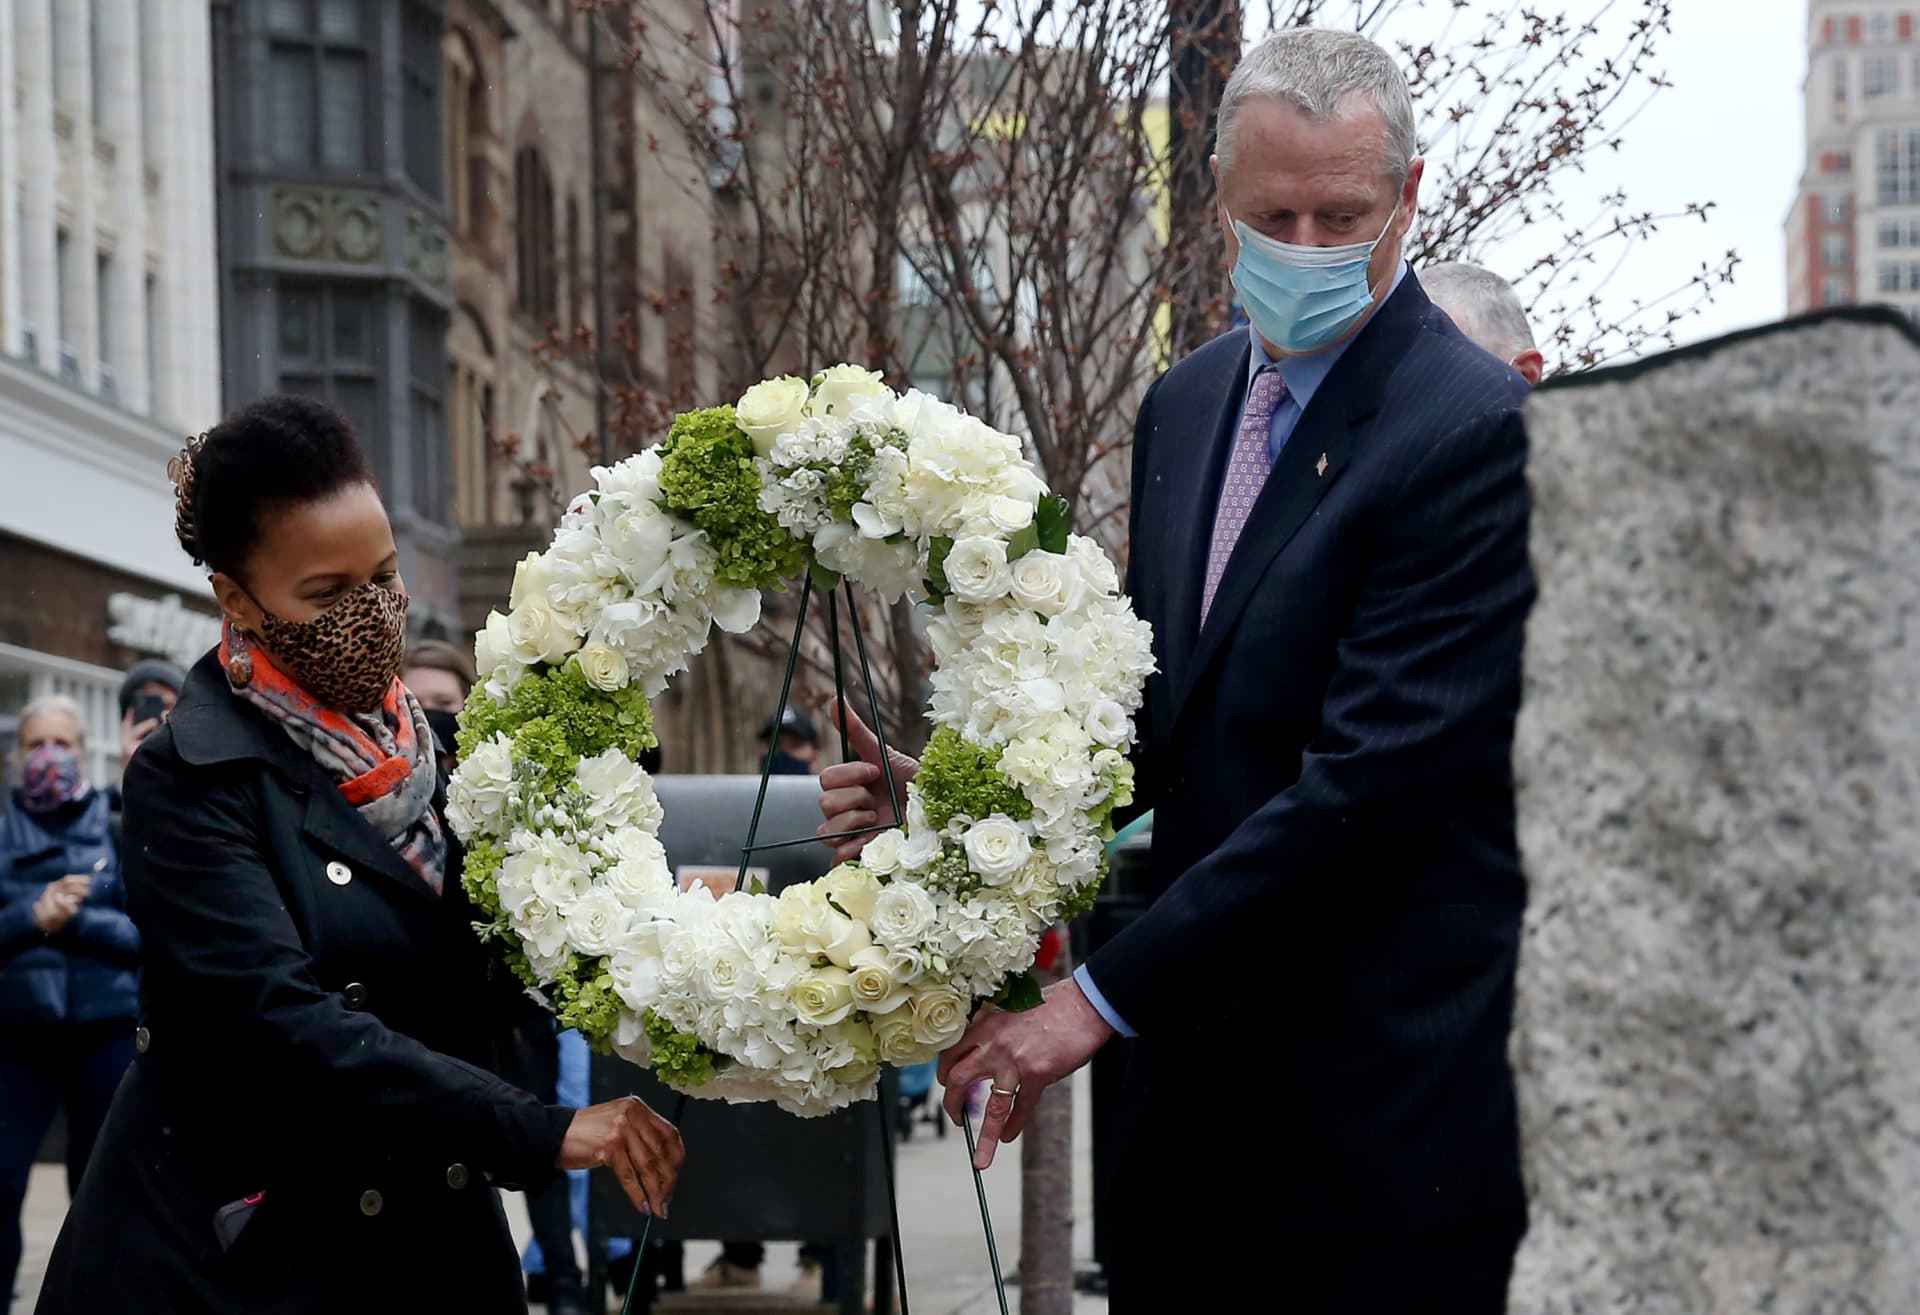 Gov. Charlie Baker and acting Mayor Kim Janey place a wreath at the site of the Boston Marathon Bombing Memorial on One Boston Day, on the eighth anniversary of the Boston Marathon bombings, on April 15, 2021 in Boston, MA. (Nancy Lane/MediaNews Group/Boston Herald)